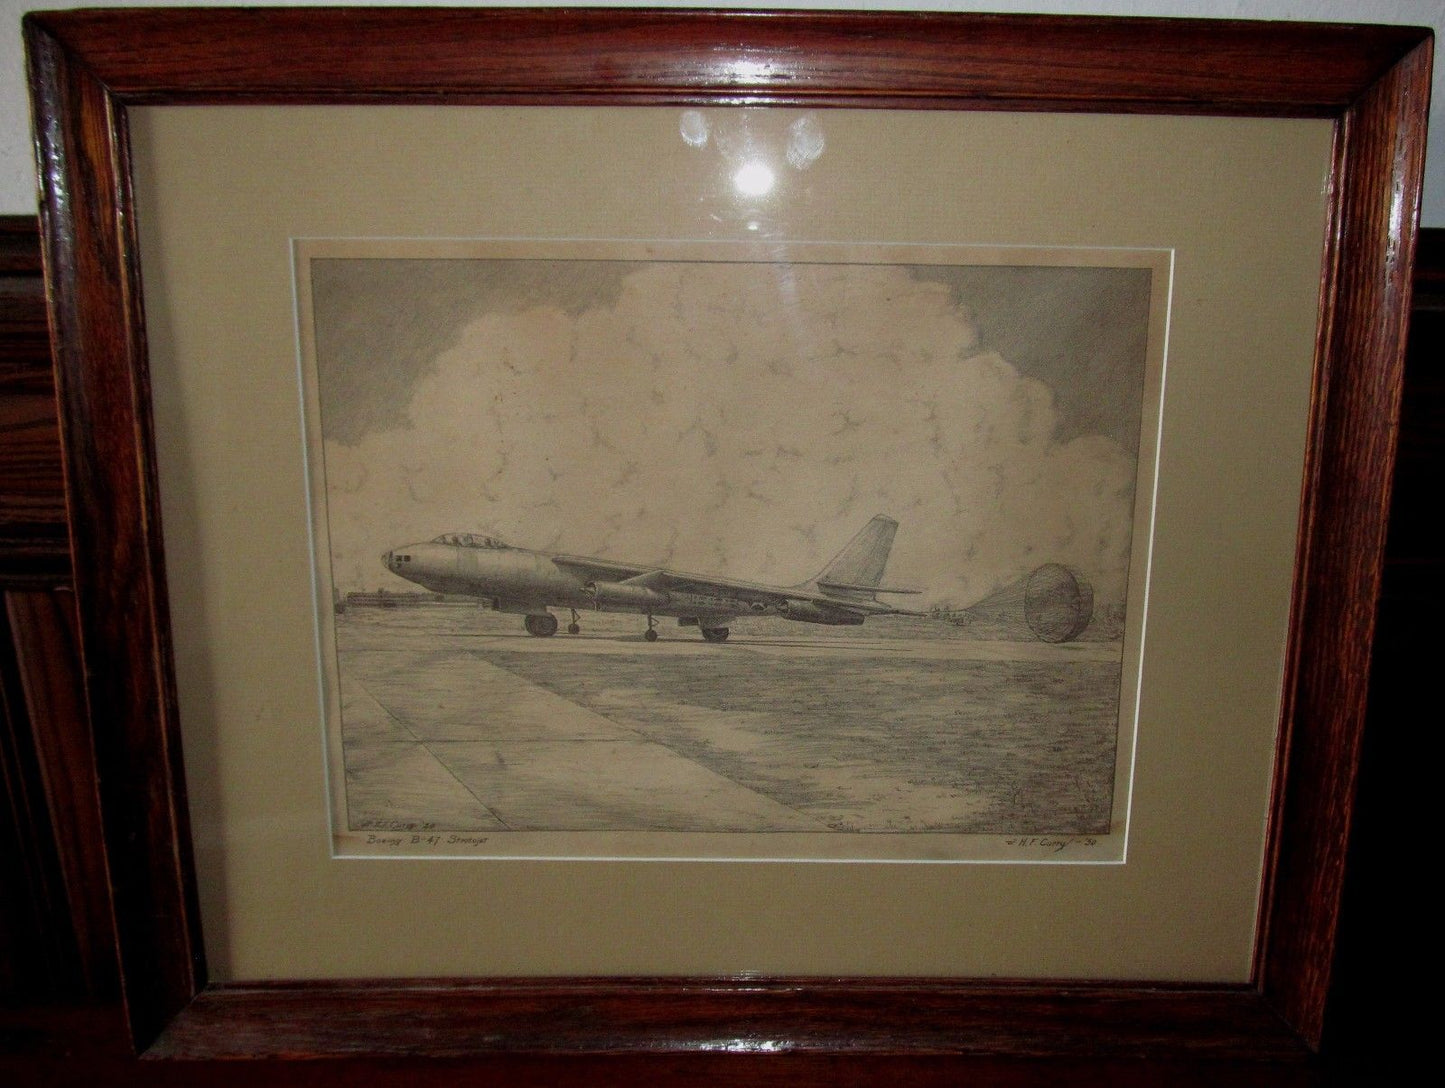 VINTAGE PENCIL DRAWN BOEING B-47 STRATOJET IN OAK FRAME BY H.F. CURRY DATED 1950